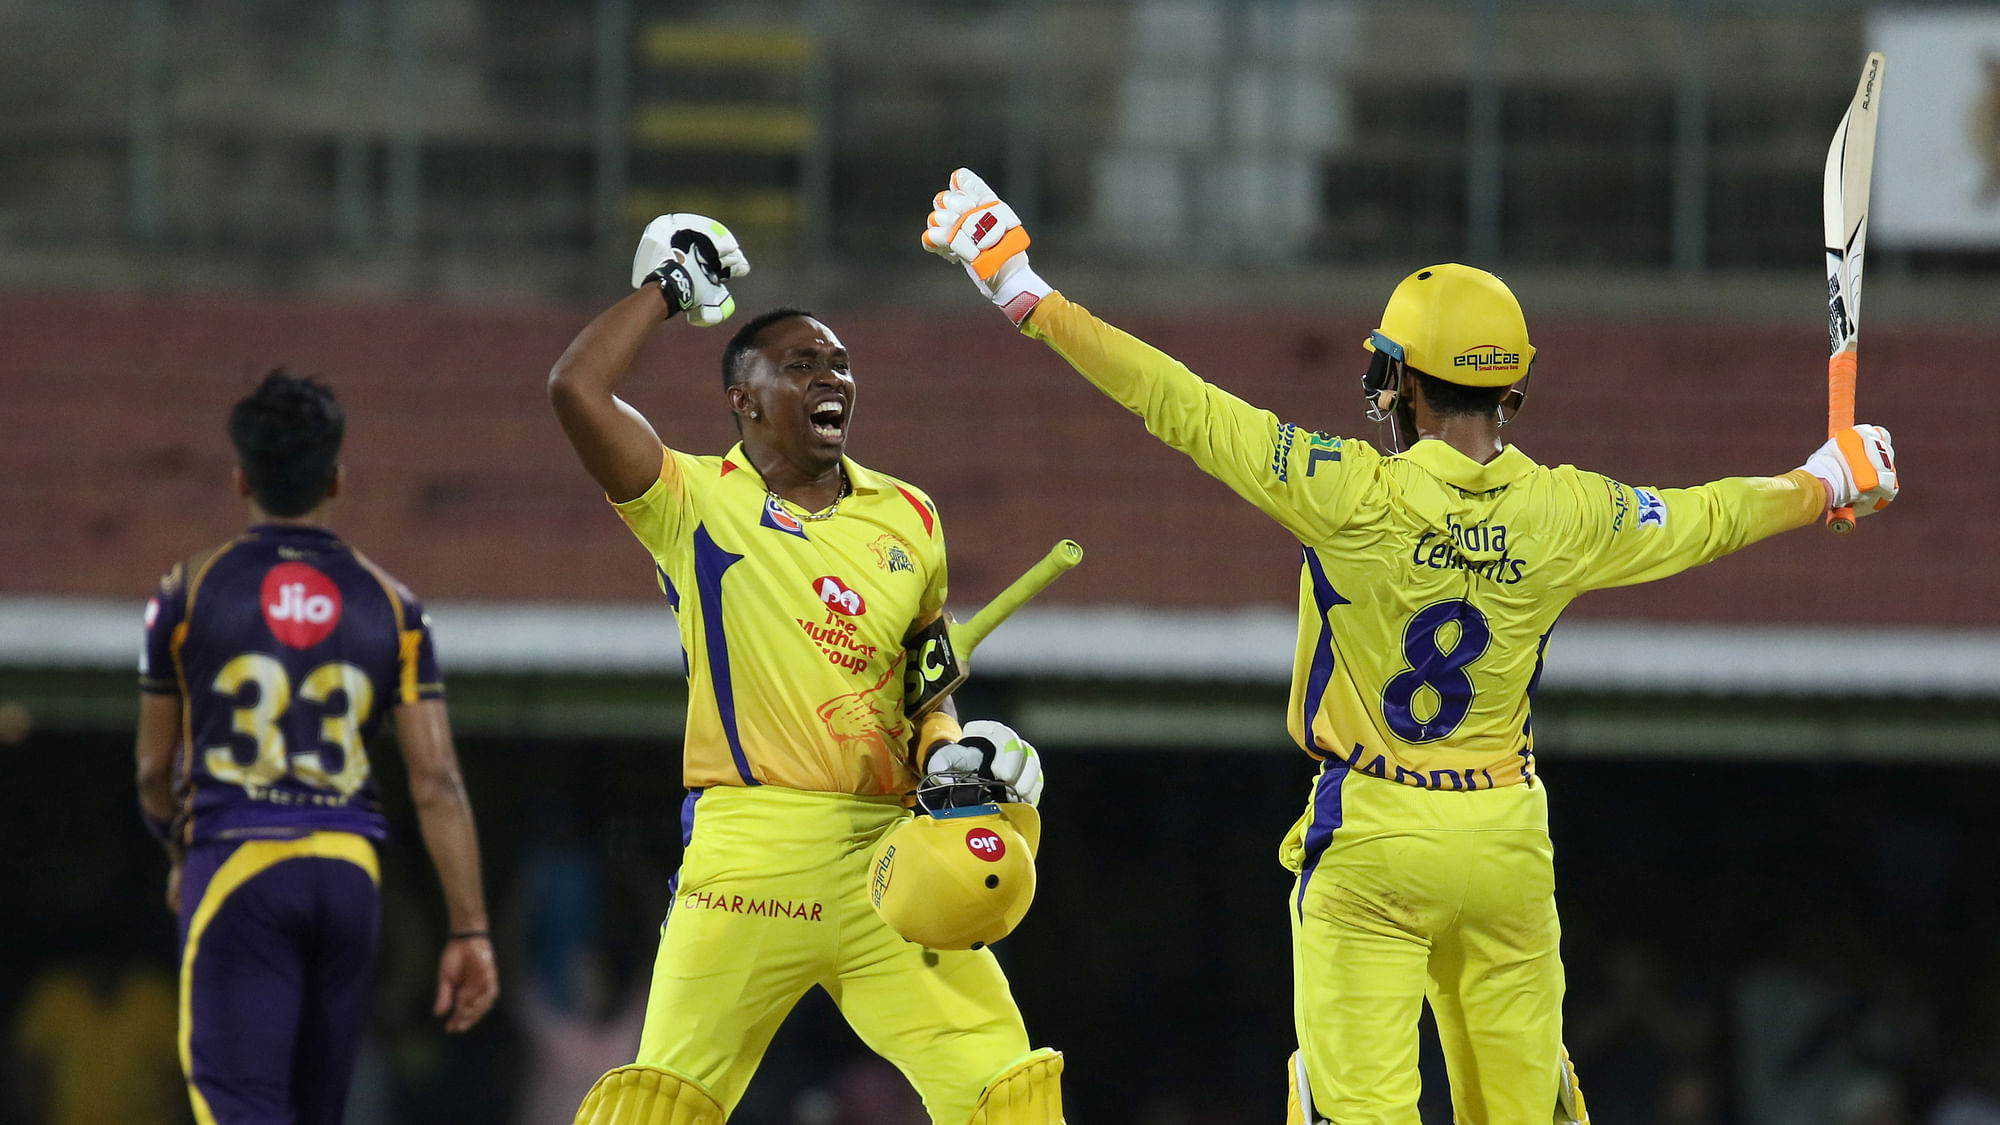 Chennai Super Kings beat KKR by 5 wickets.